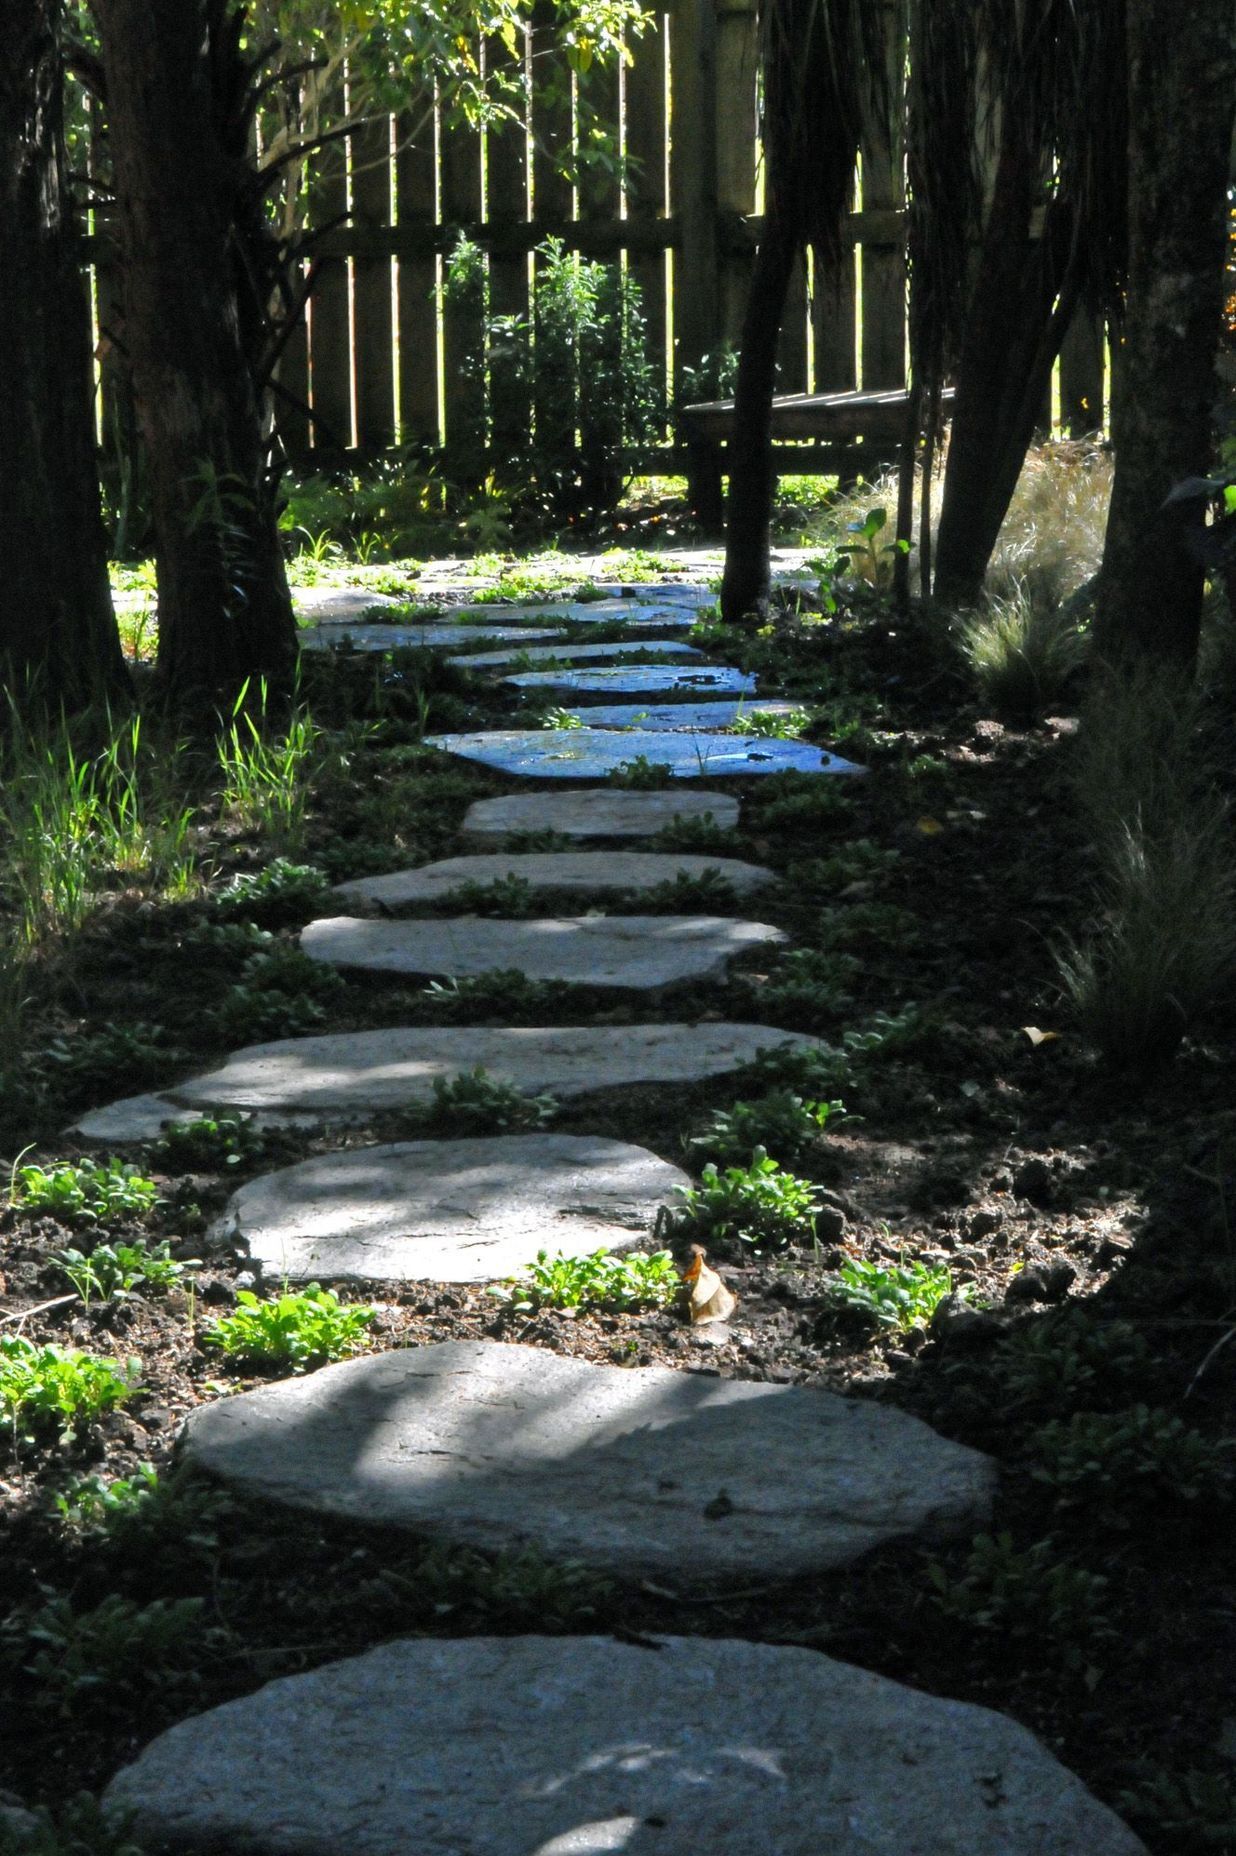 Natural stone stepping stones lead through the kanuka glade which features all native planting of grasses, ferns and understorey shrubs